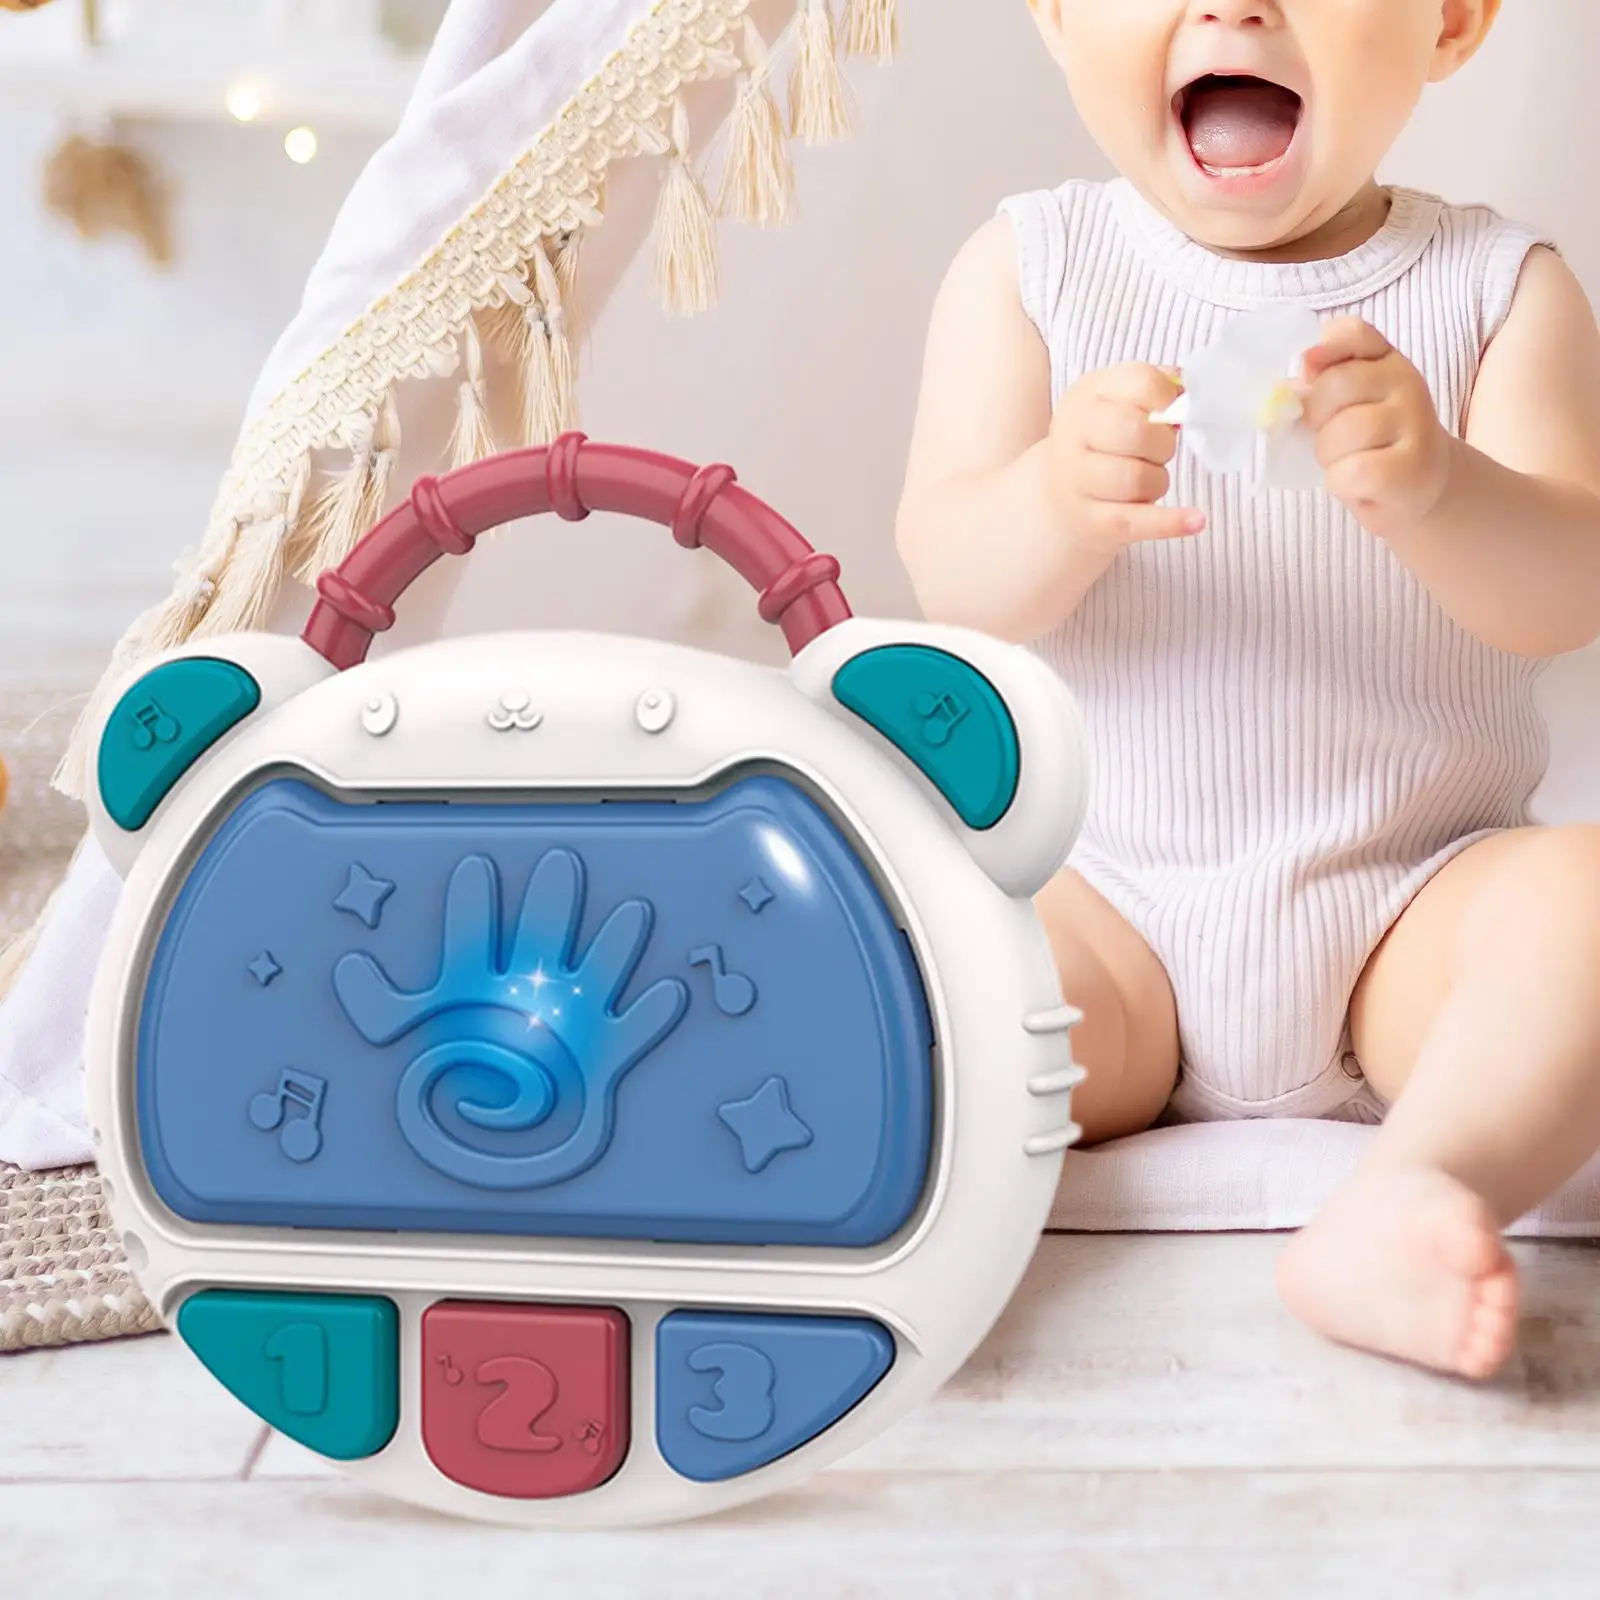 Baby Musical Electronic Toy Hand Clapping Drum with Music Light Musical Instrument Game for Baby Girls 18 Months and up